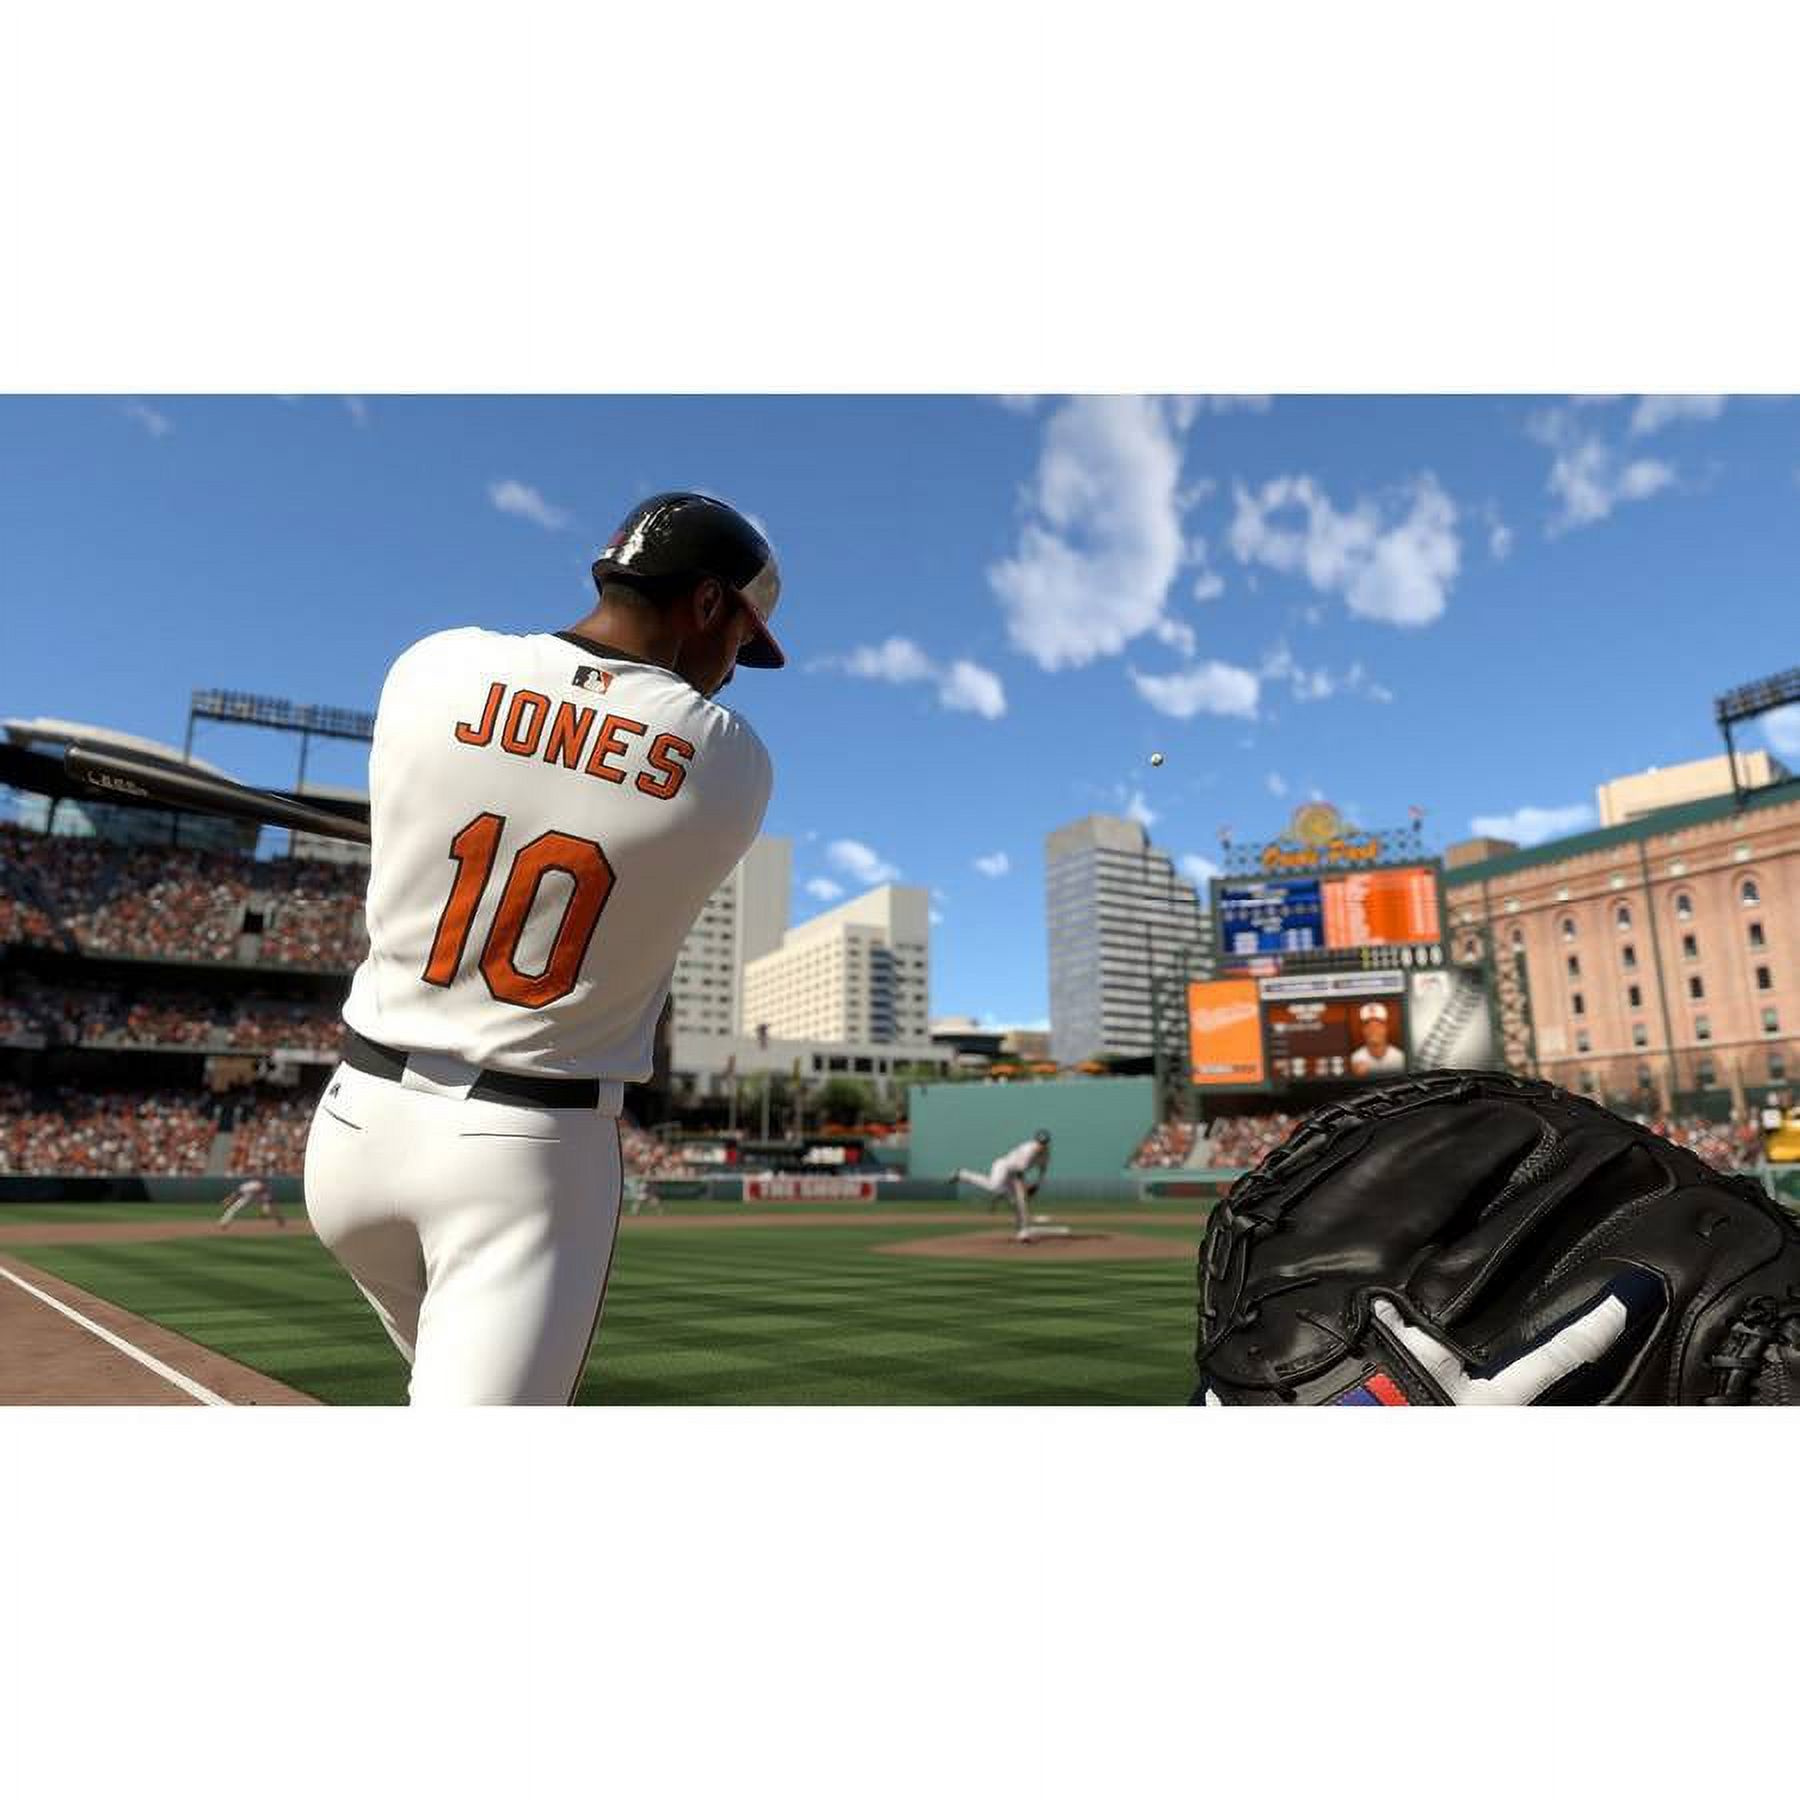 Sony MLB 15: The Show (PS4) - Video Game - image 4 of 5